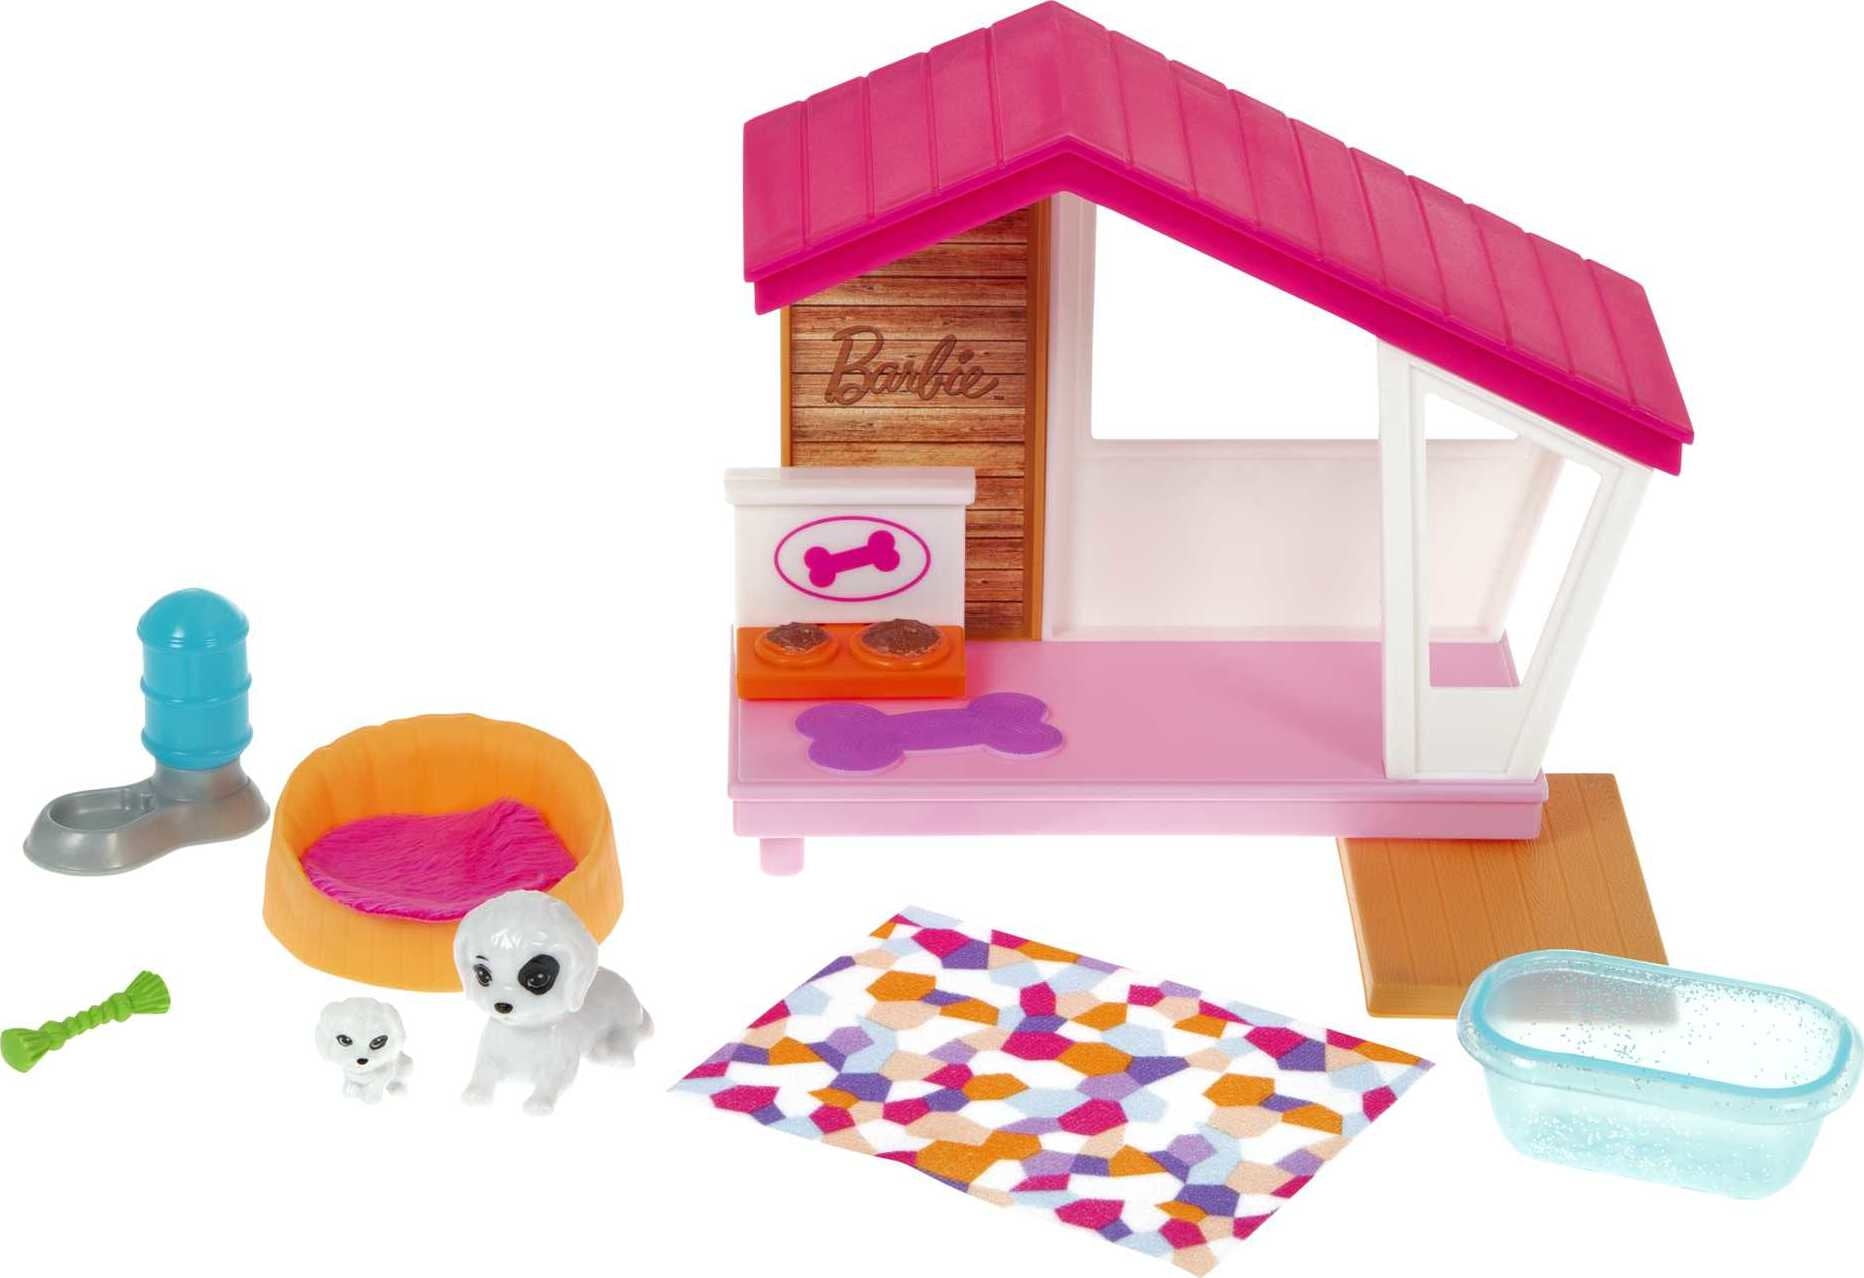 Barbie and Chelsea The Lost Birthday Doll, Pet and Accessories For 